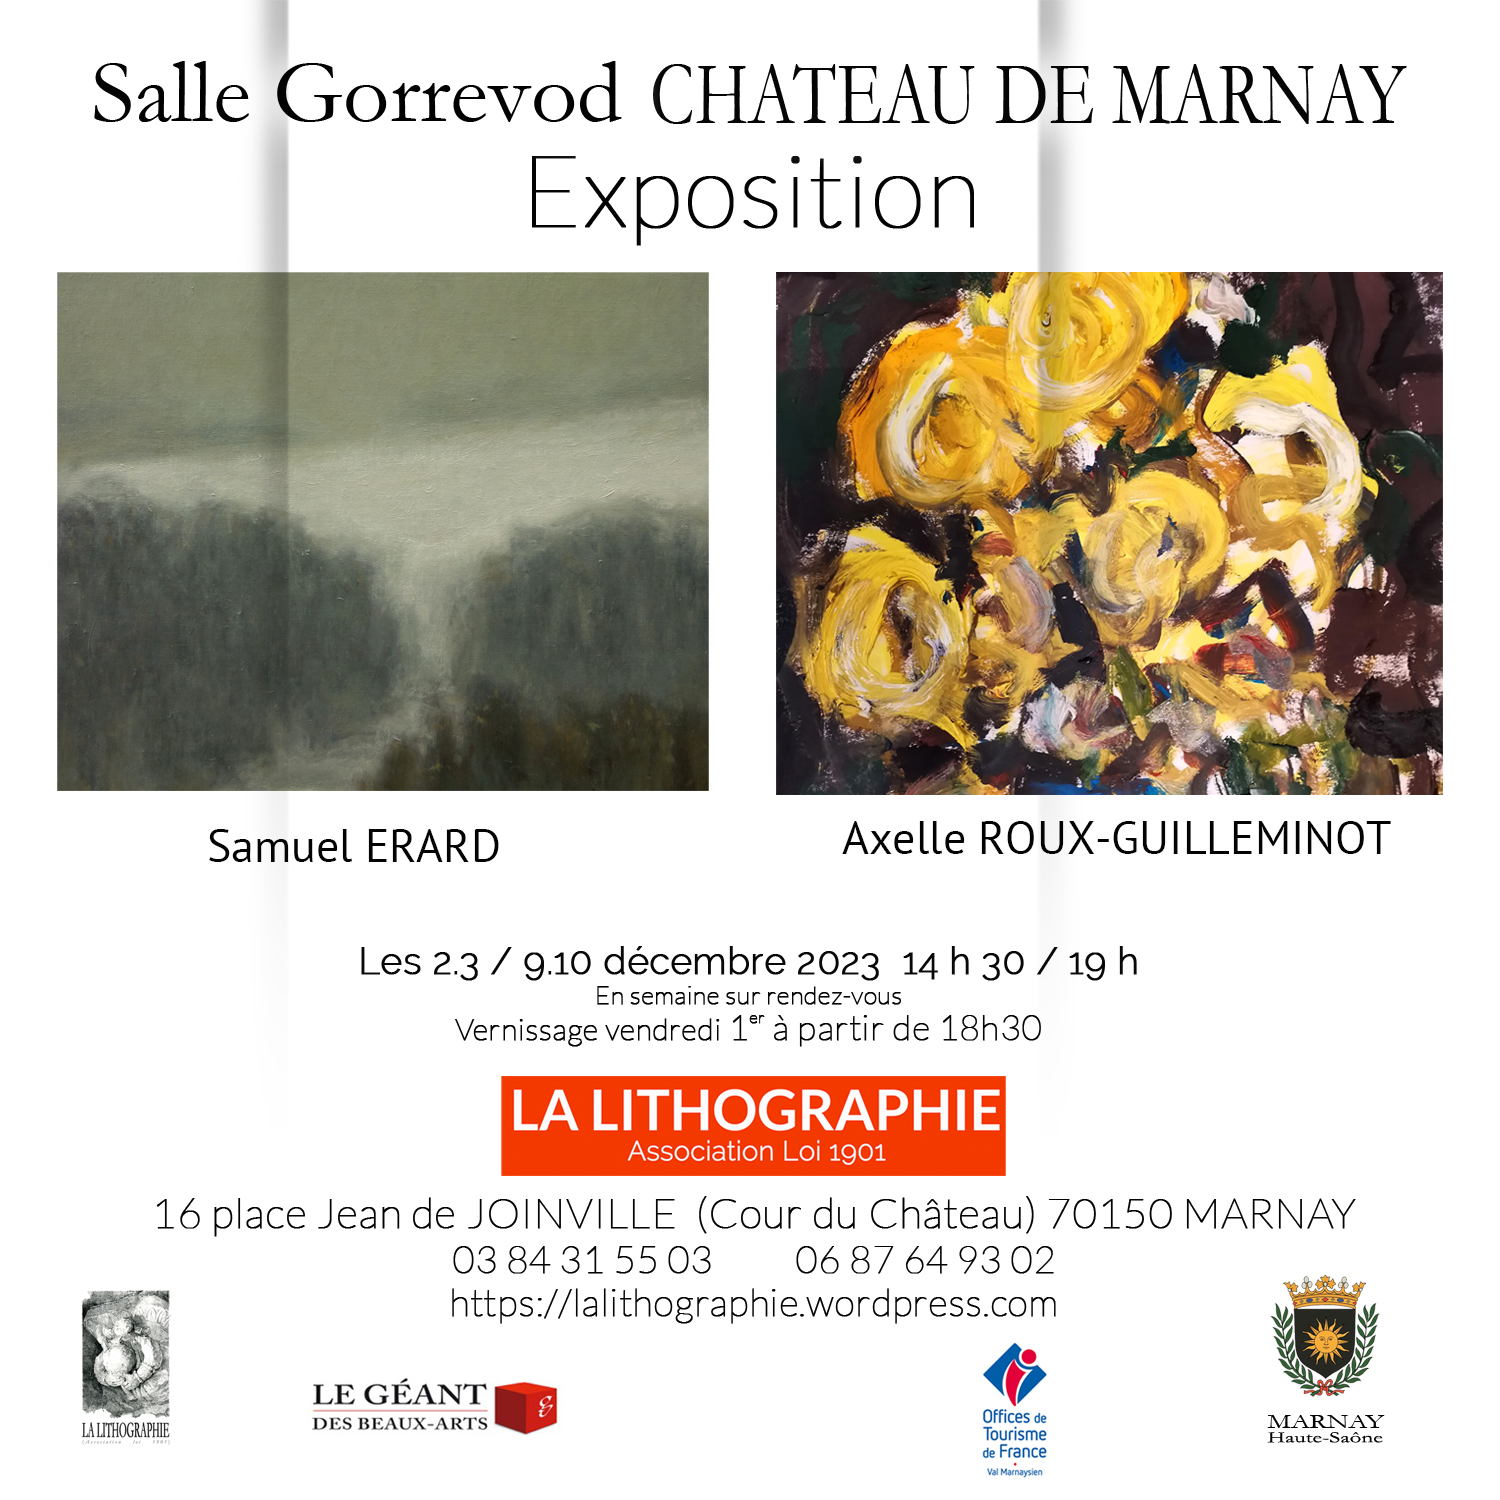 Expositions